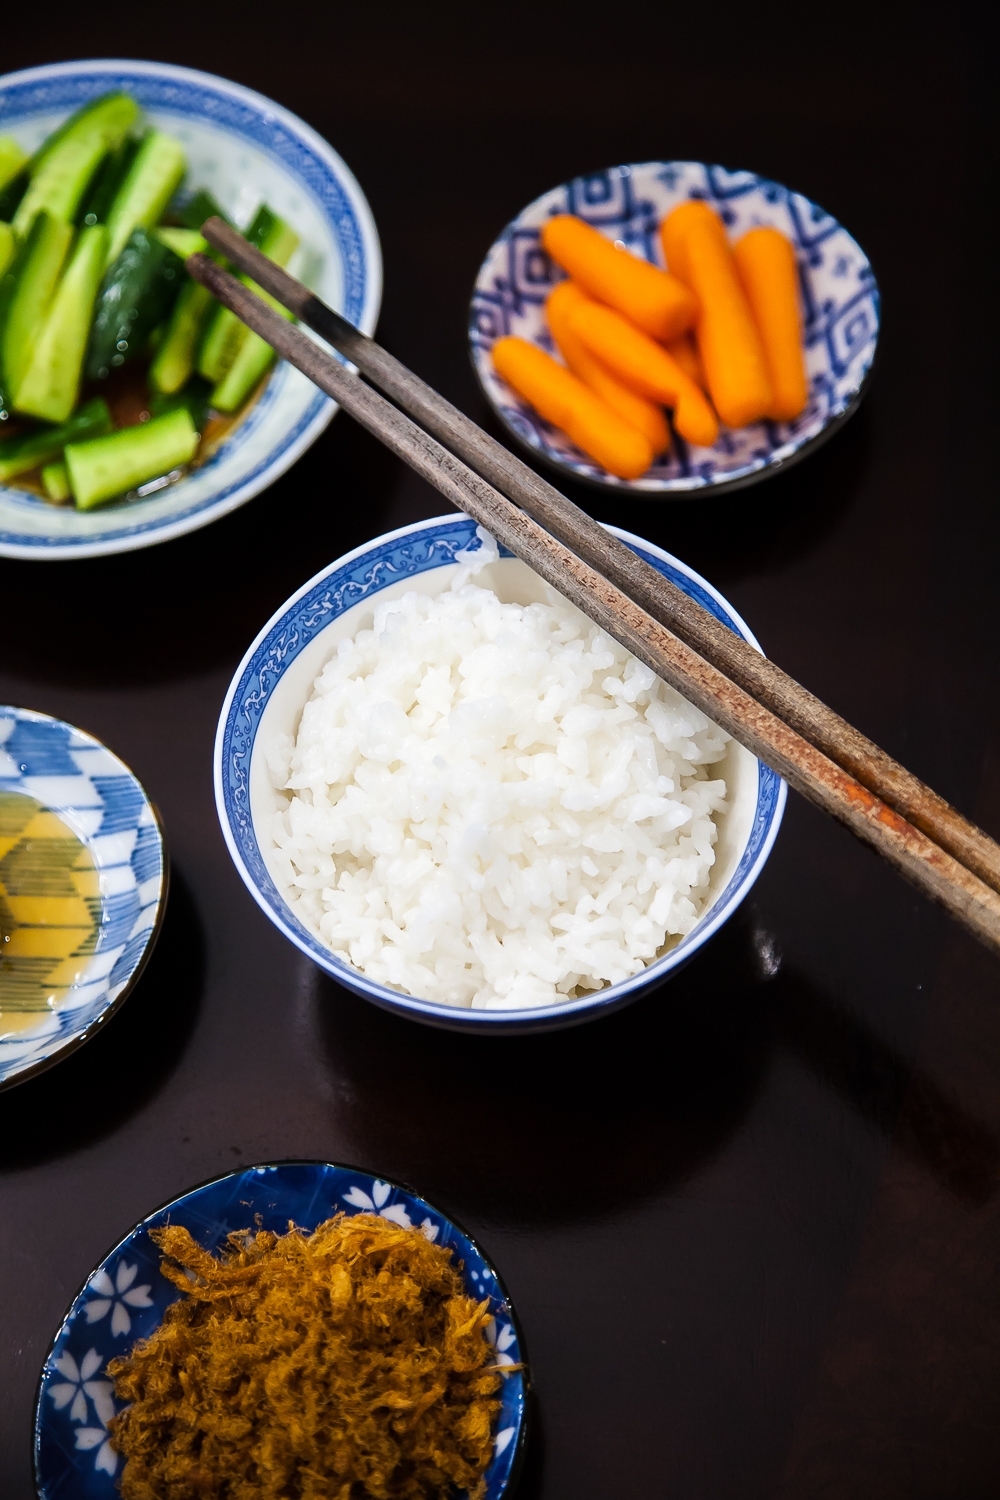 https://www.asiancookingmom.com/wp-content/uploads/2021/05/How-to-Cook-Rice-with-a-Pot-13-of-13.jpg